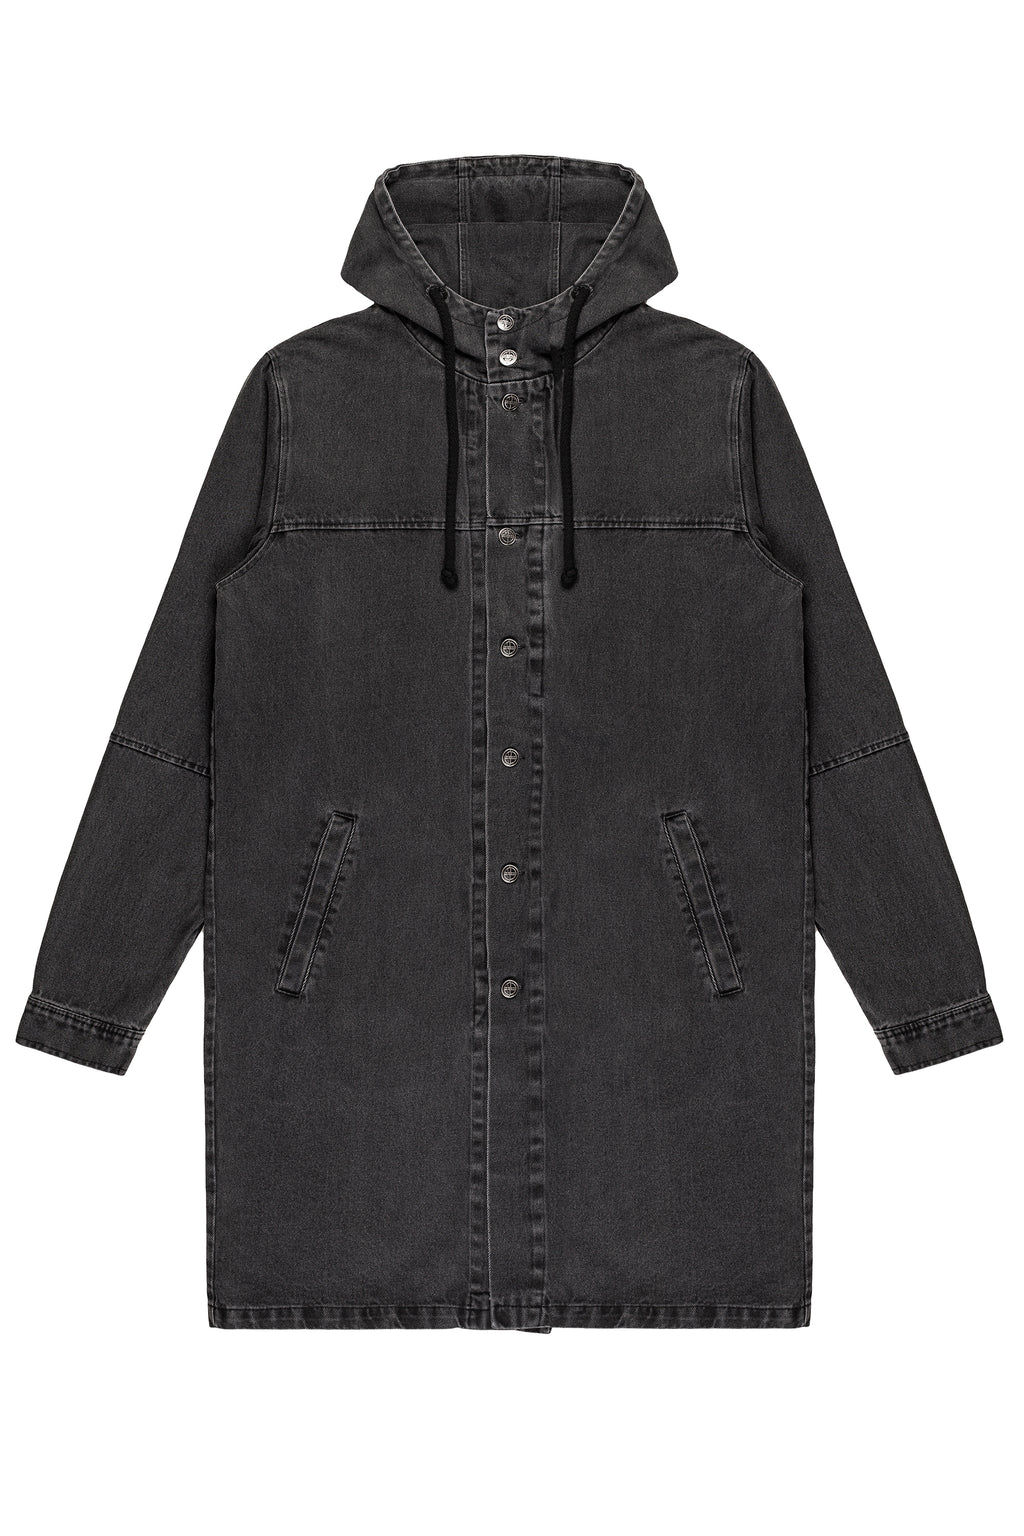 DENIM PARKA COAT IN WASHED BLACK – The Hive Clothing